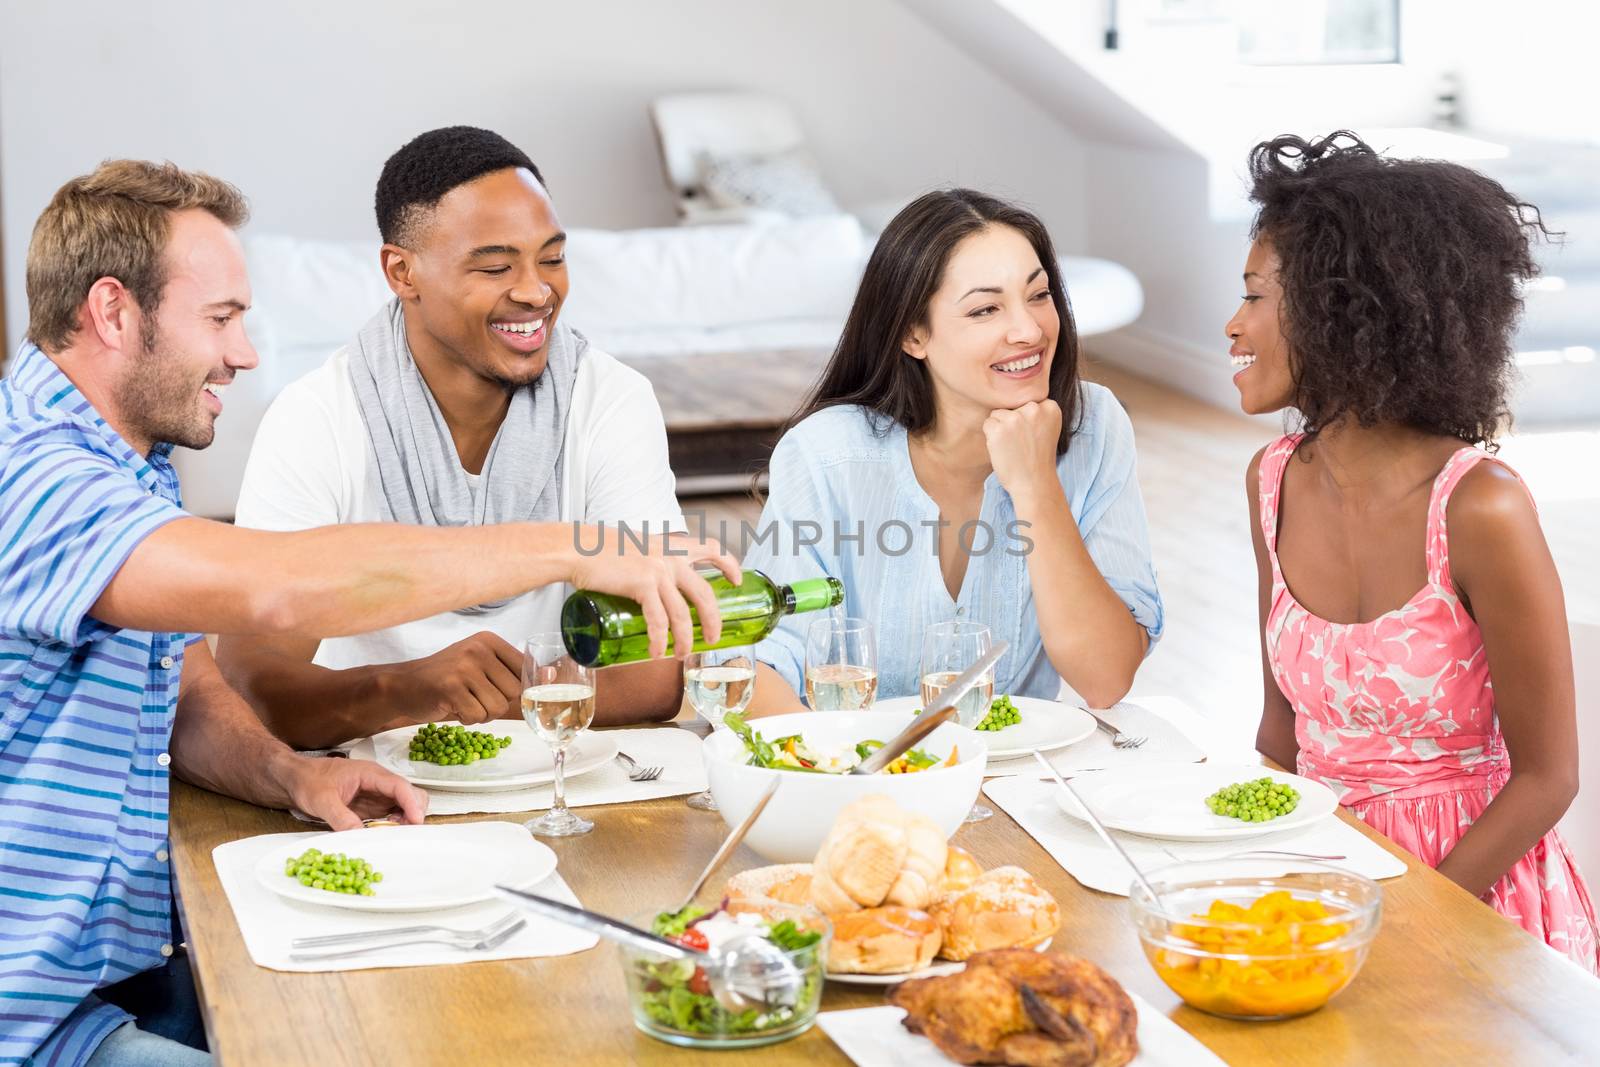 Friends interacting while having a meal by Wavebreakmedia